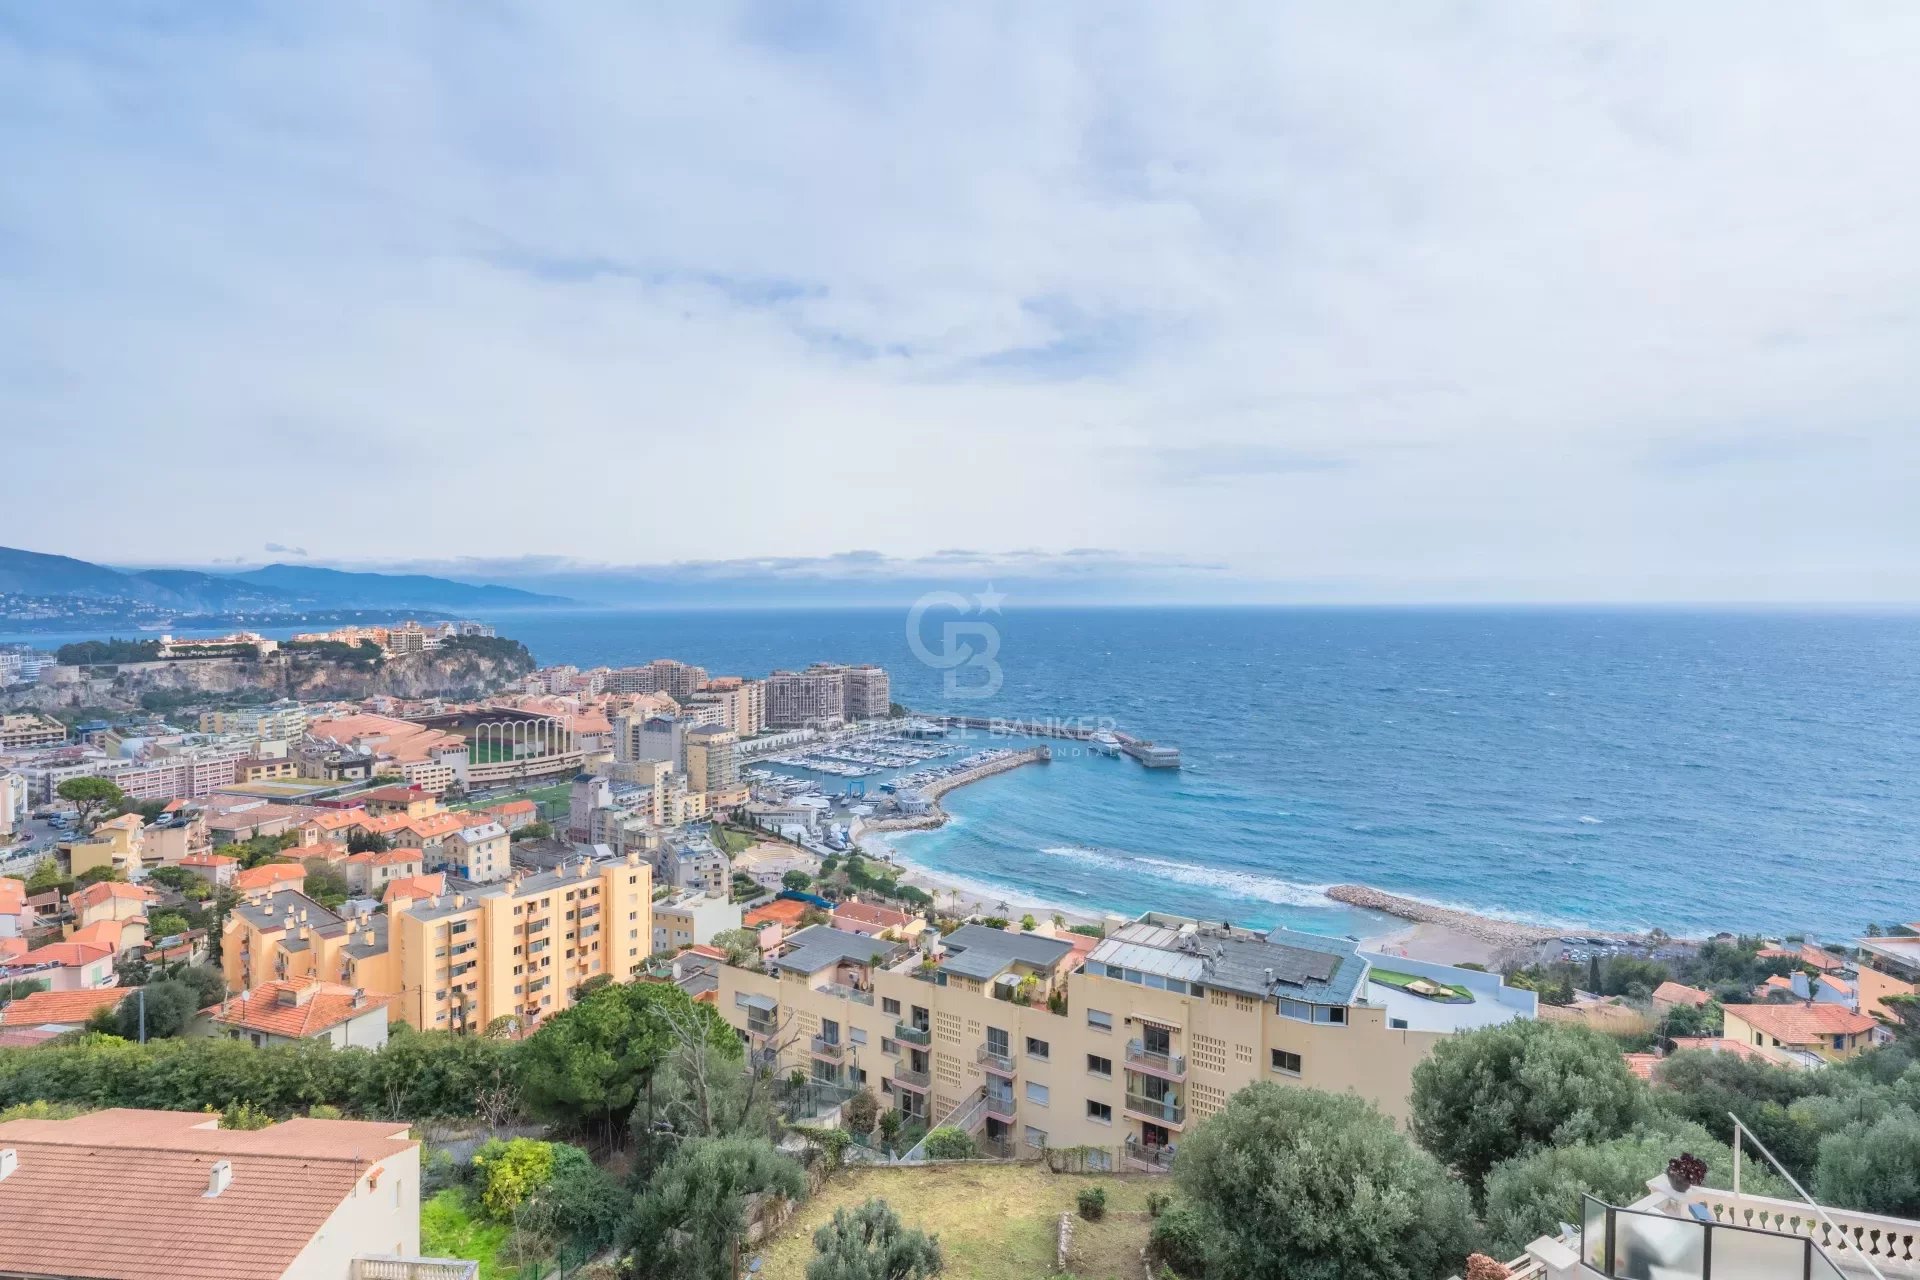 Apartment for sale with panoramic sea view of Monaco! Unique on the market!